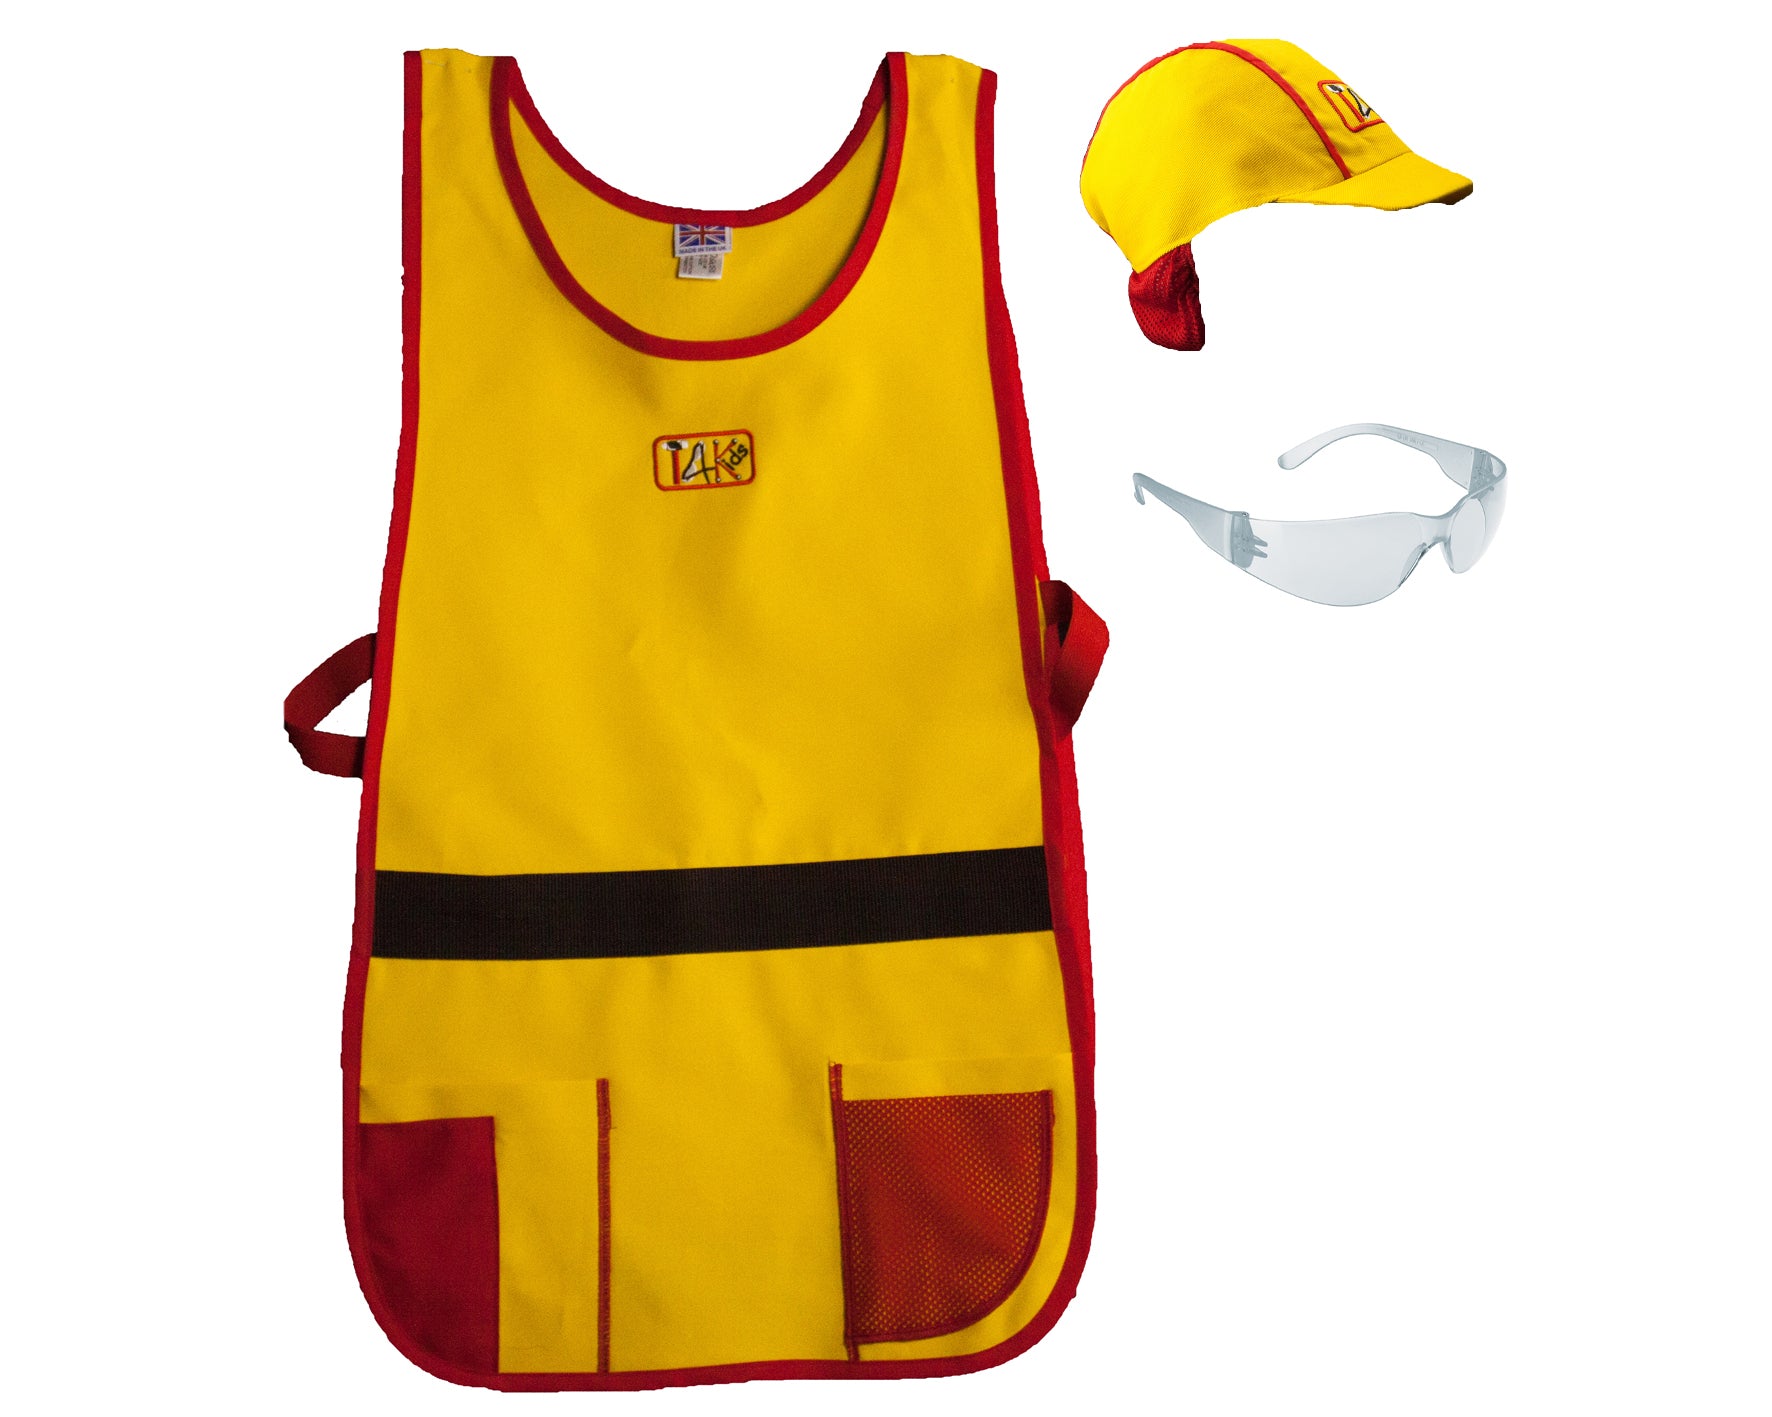 Tinkering workwear set® - Adult size (with safety glasses)